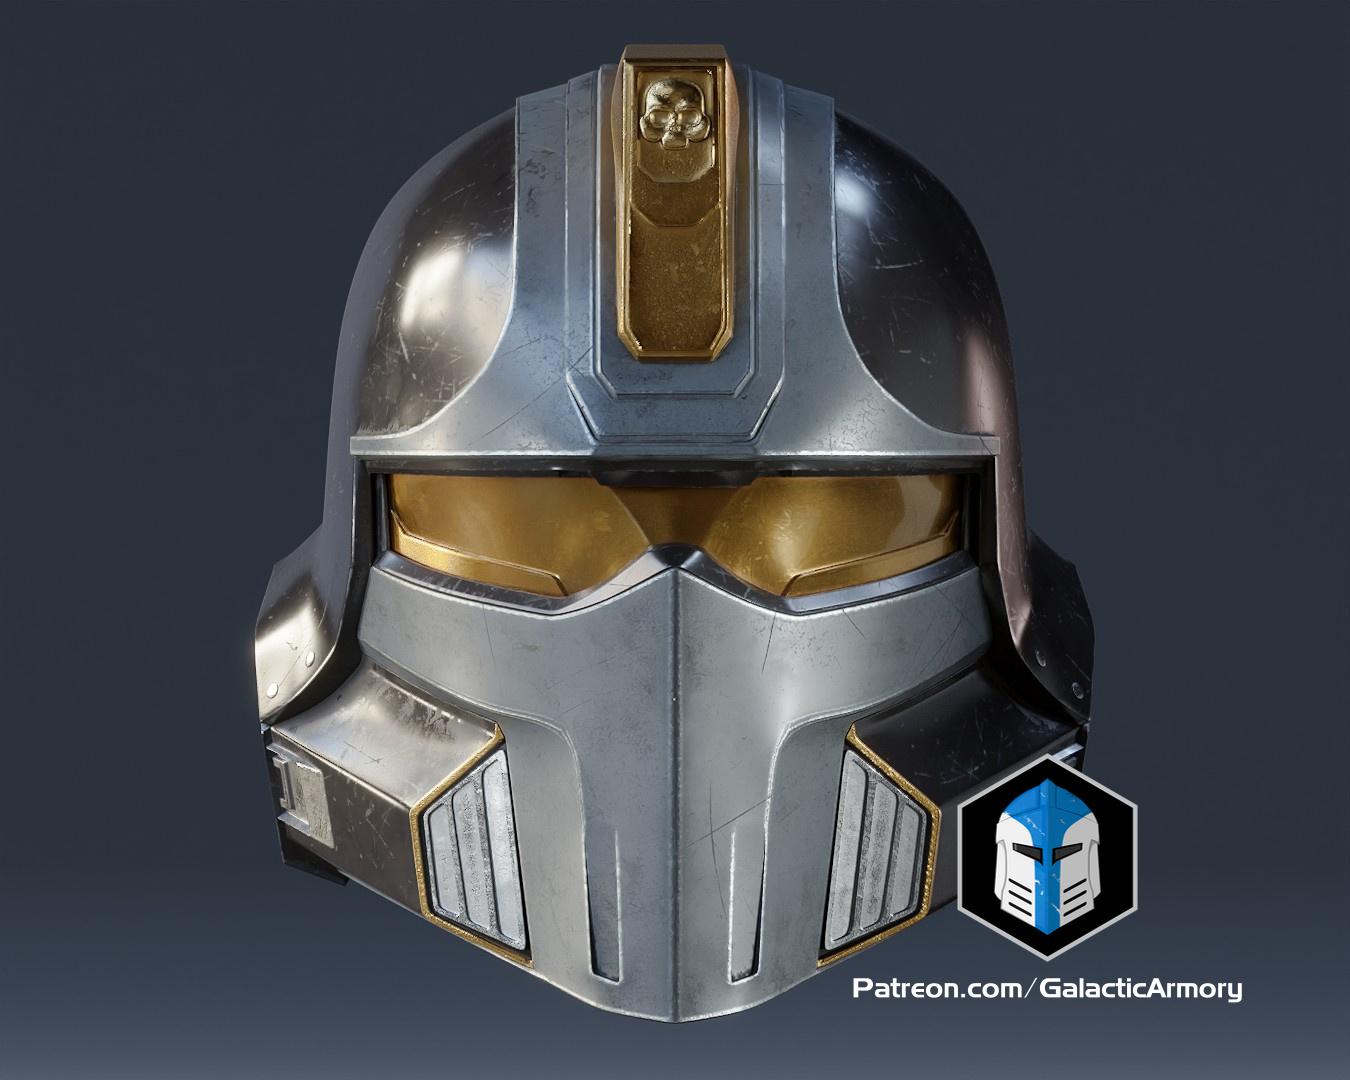 [New Files!] The Helldivers 2 Hero of the Federation helmet has been added to the February Specialist rewards!